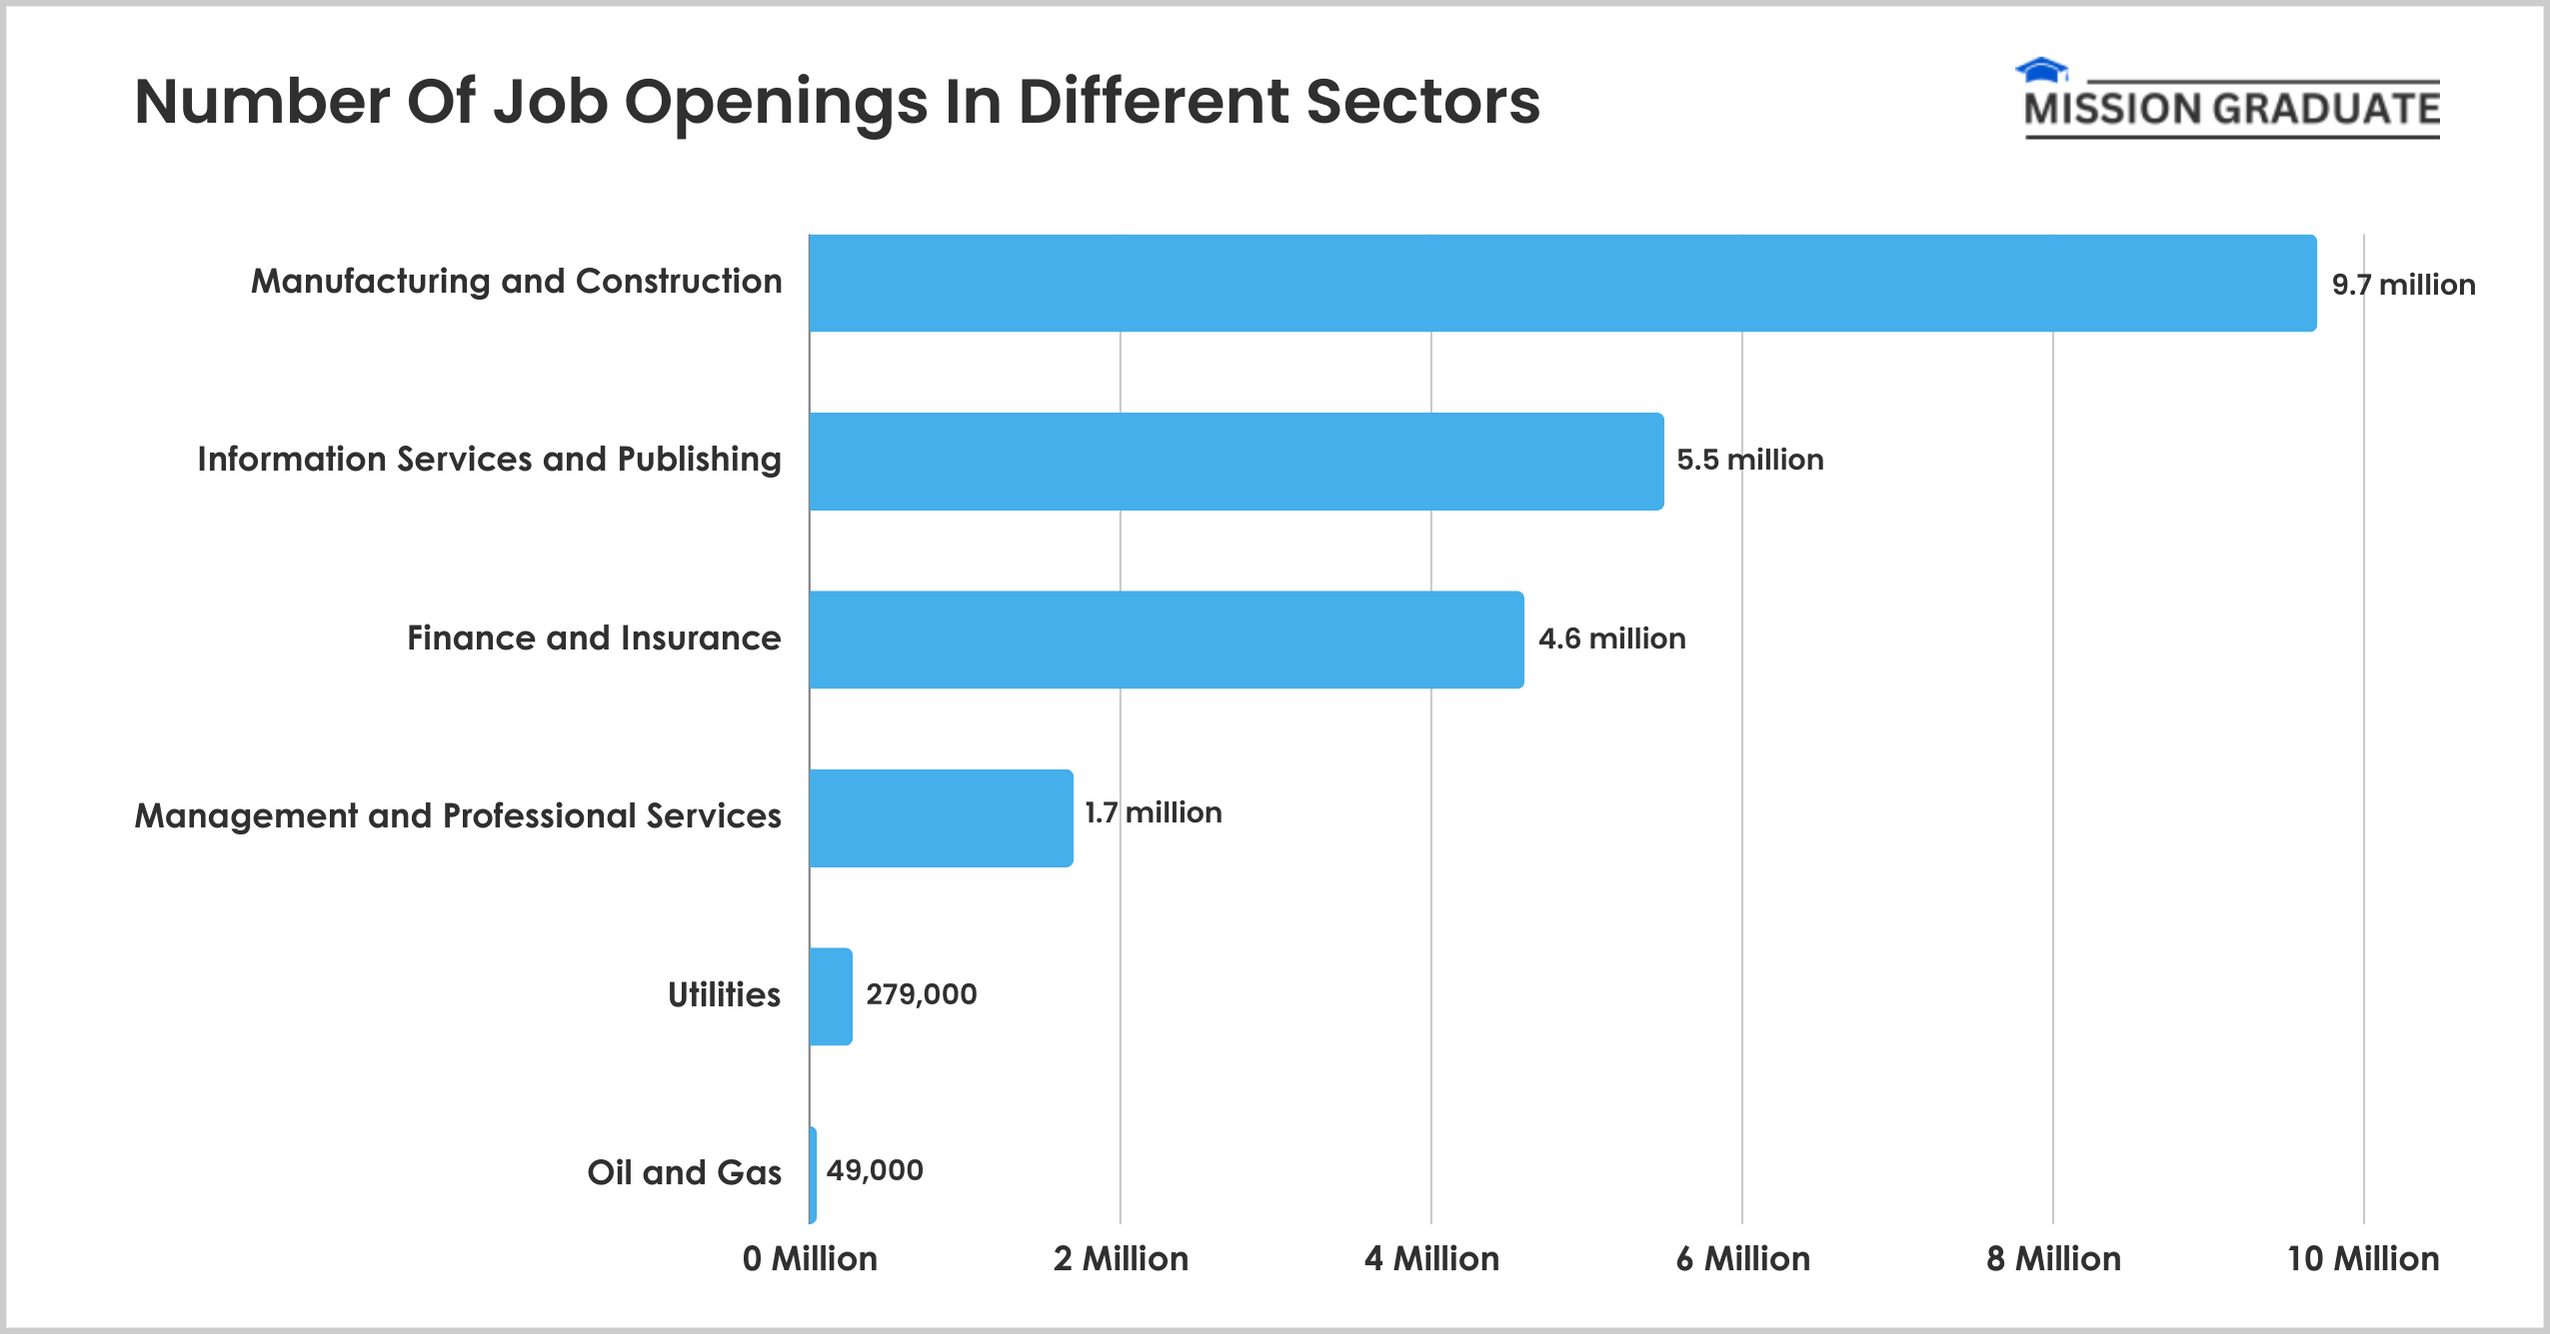 Number Of Job Openings In Different Sectors